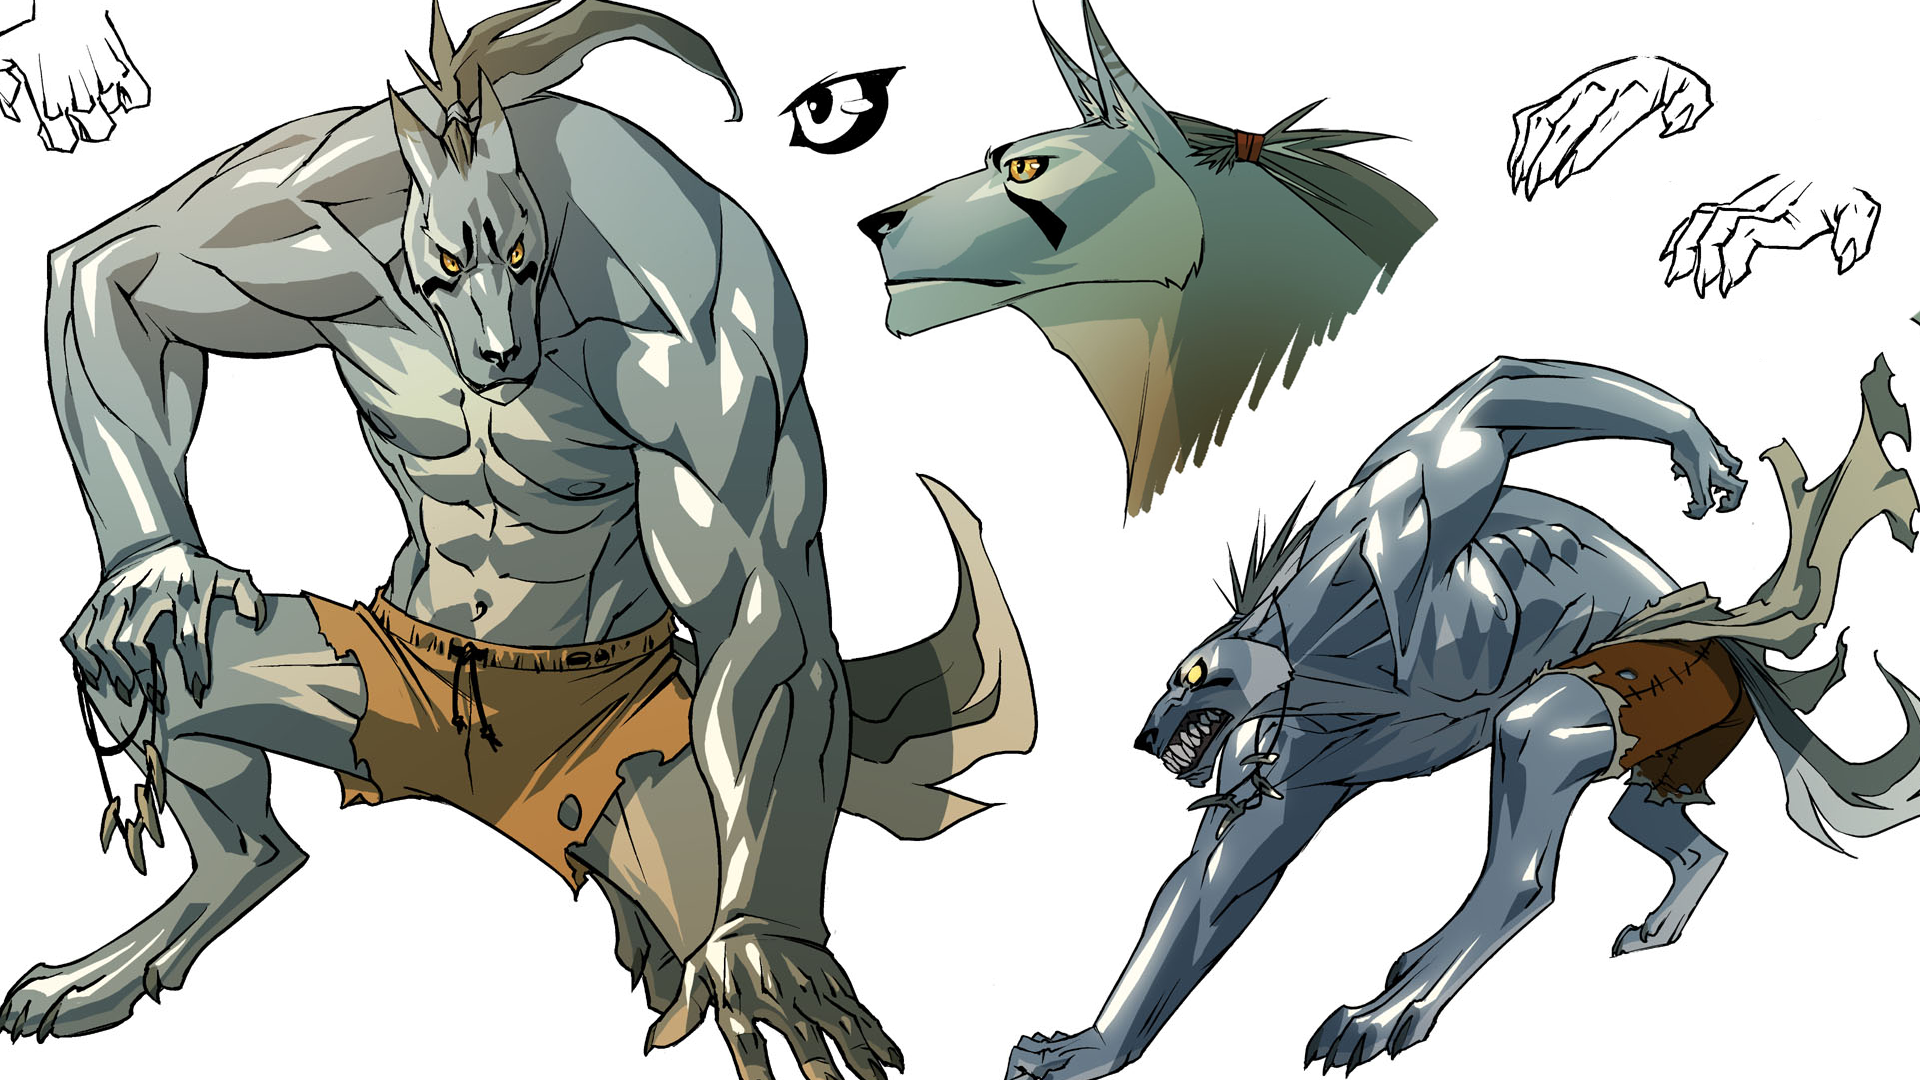 General 1920x1080 Florent Maudoux Freaks' Squeele French comics Anthro white background creature